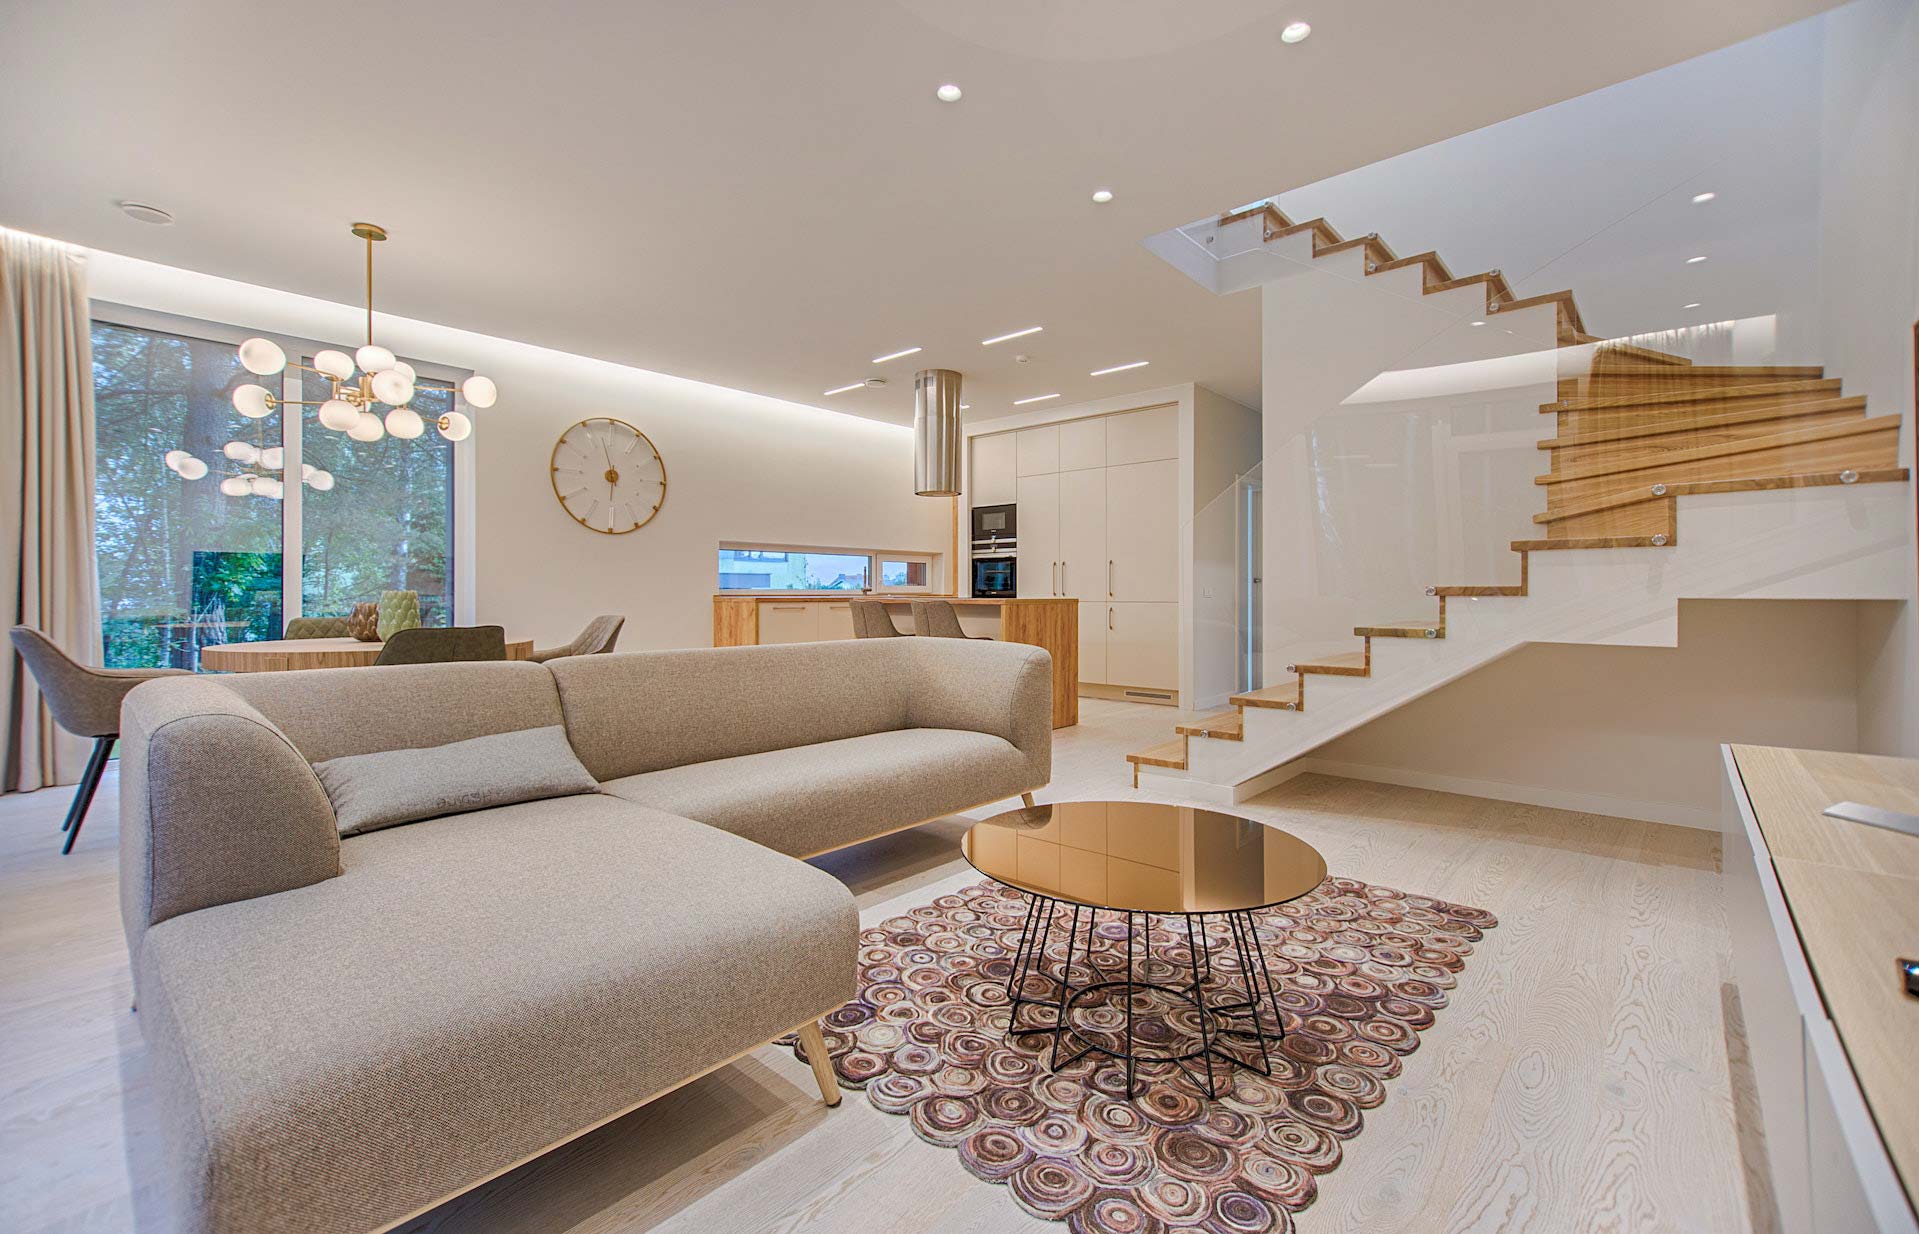 View into a large living room with staircase.